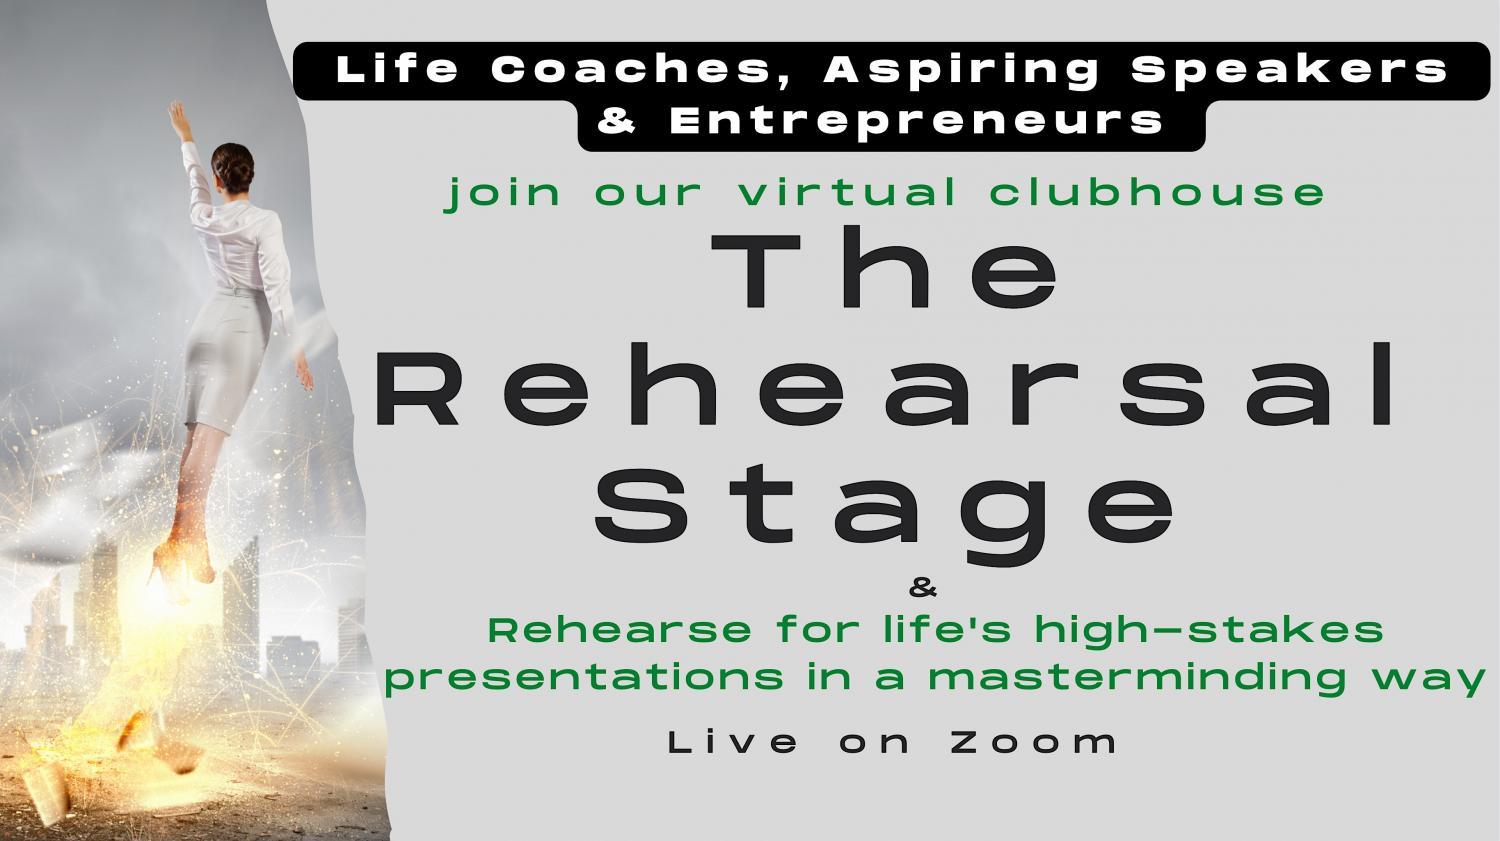 Coaches & Speakers-10x Your Speaking Confidence on The Rehearsal Stage
Tue Jan 3, 12:30 PM - Tue Jan 3, 2:00 PM
in 60 days